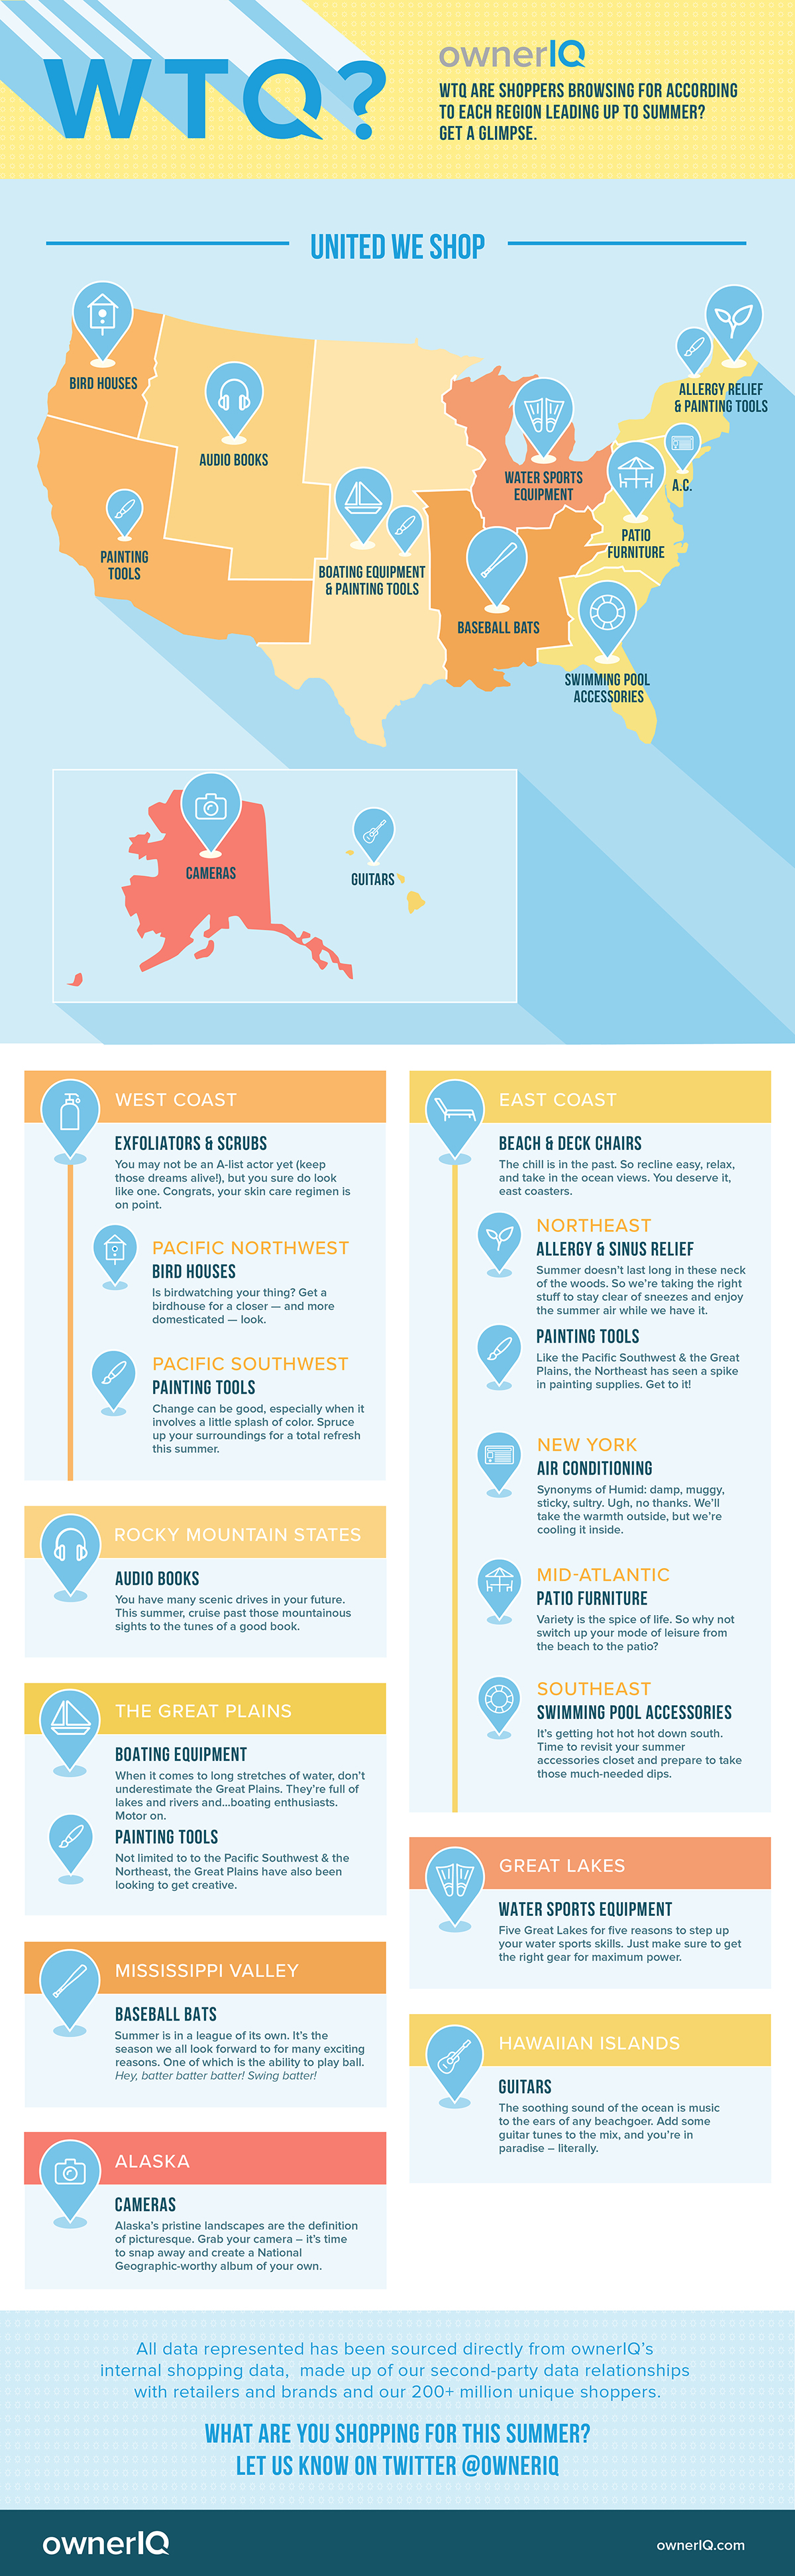 WTQ? Summer Shopping Trends Infographic